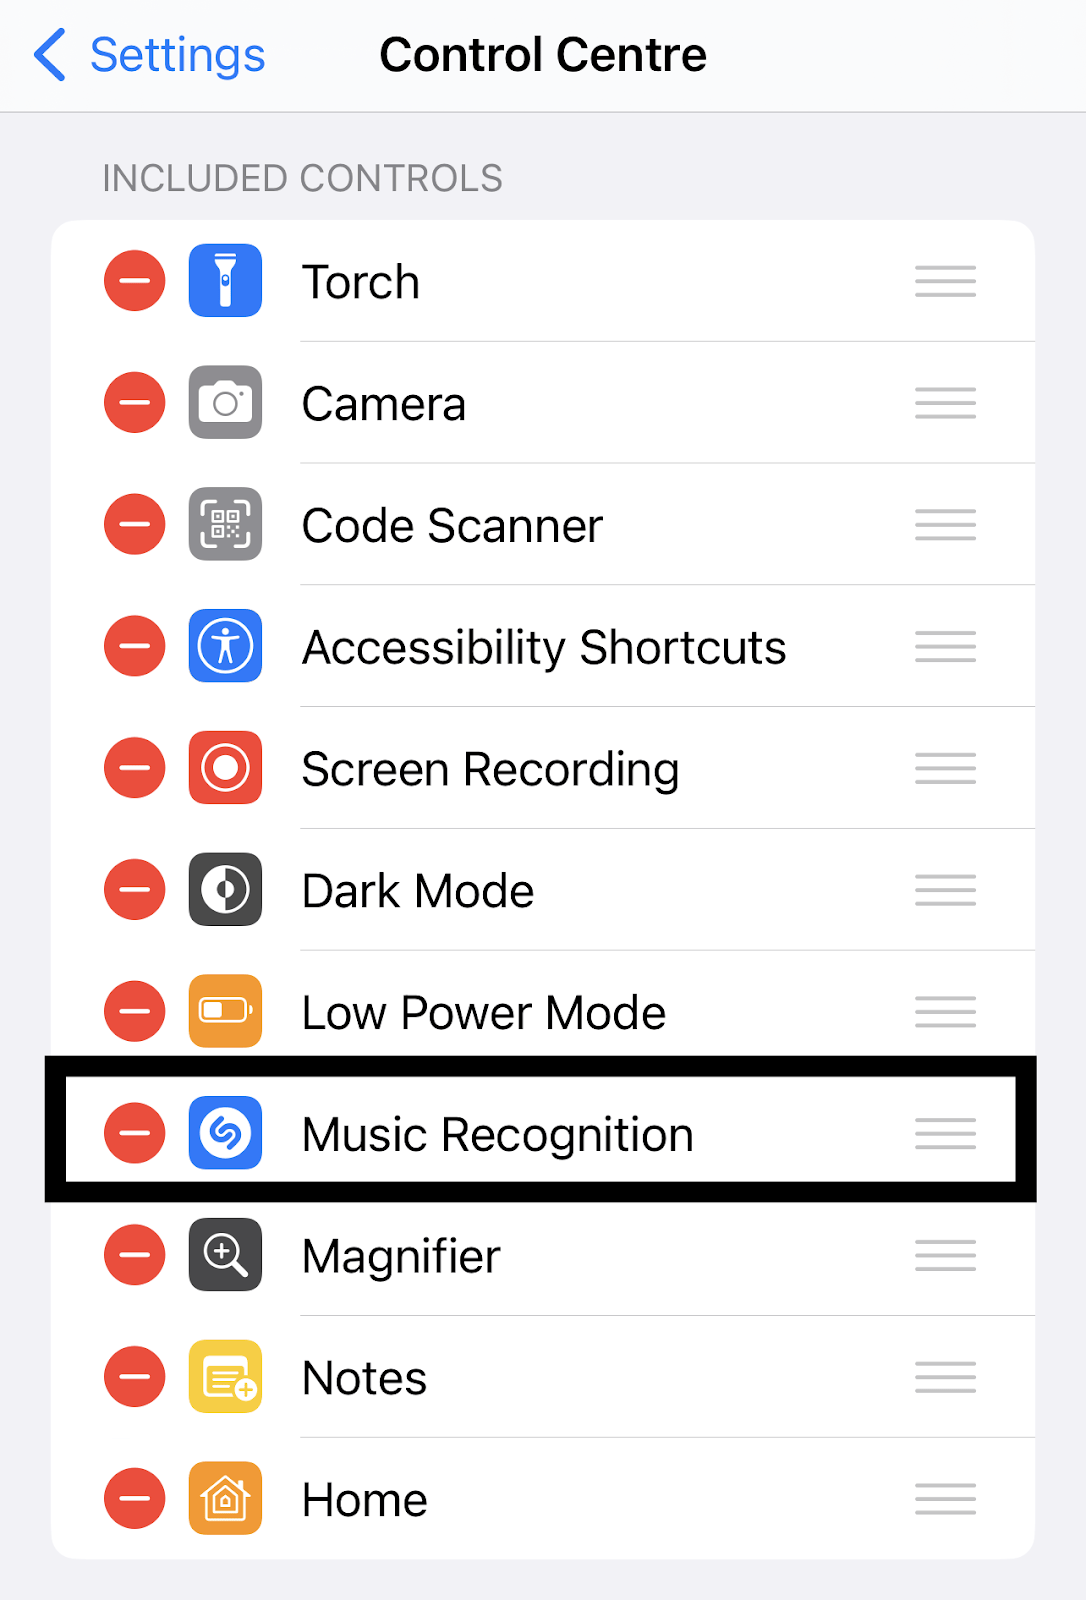 edit Control Centre on iOS to re-add music recognition toggle to fix Shazam music recognition not working, app issues and problems, and crashing on iPhone